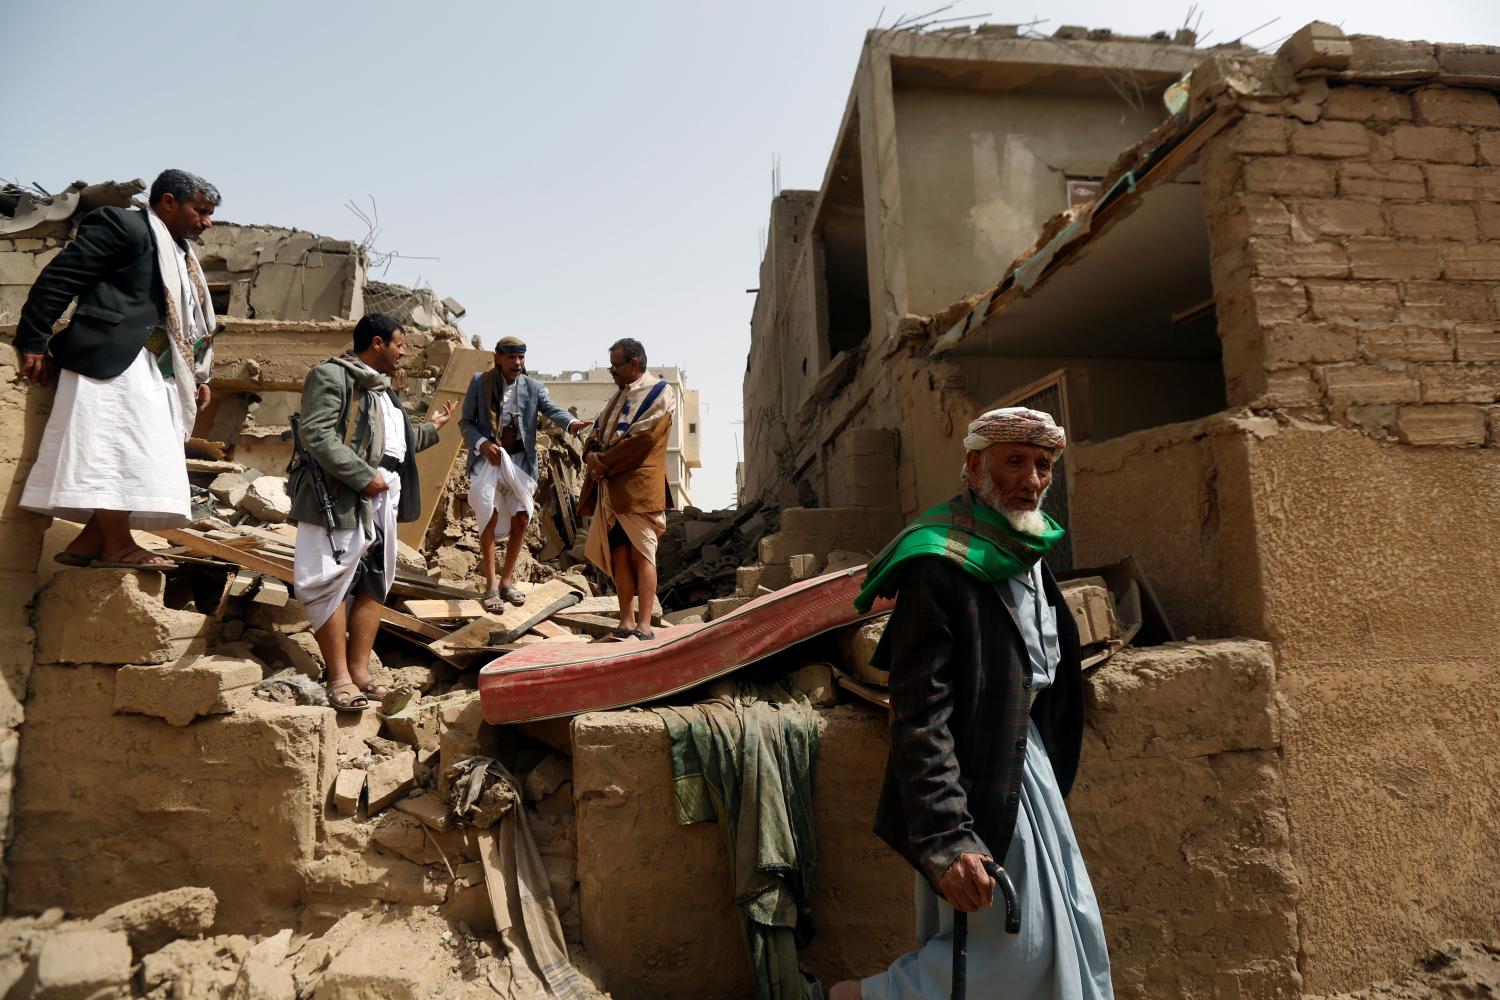 People stand on the rubble of a house destroyed by an air strike in Amran, Yemen June 25, 2018. REUTERS/Khaled Abdullah - RC1FD0EBED70